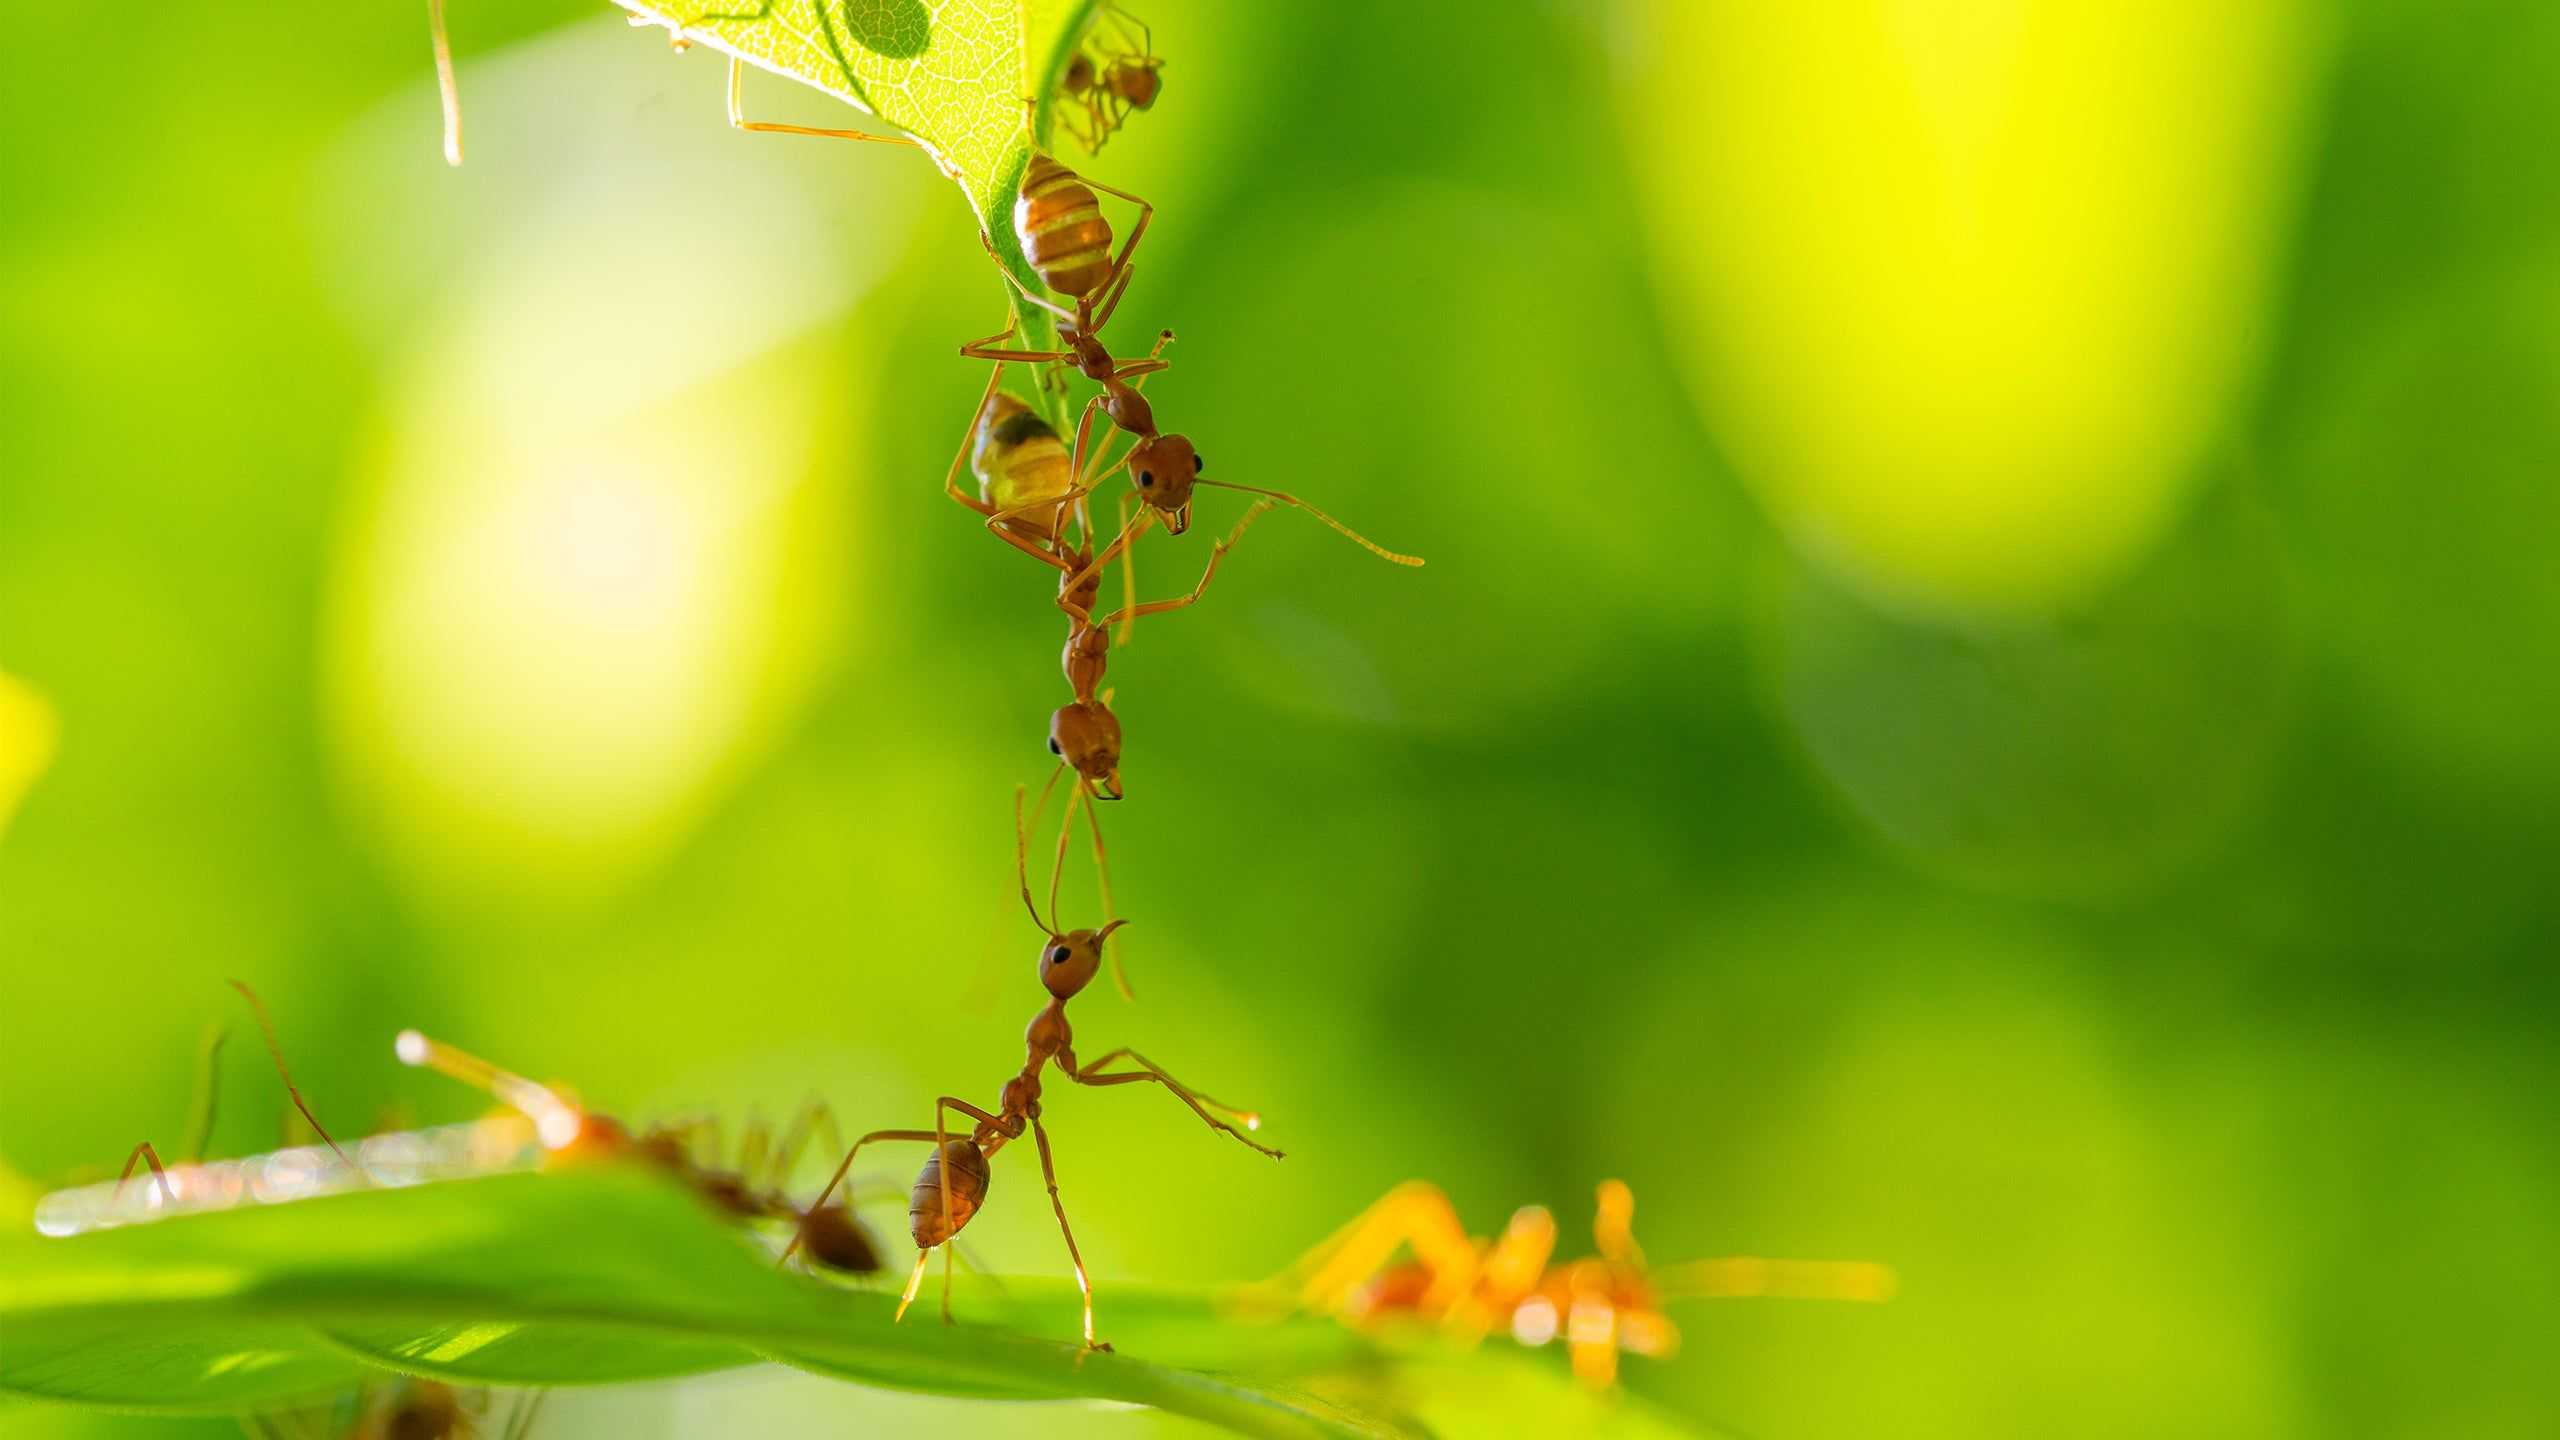 fire ants climbing between two leaves